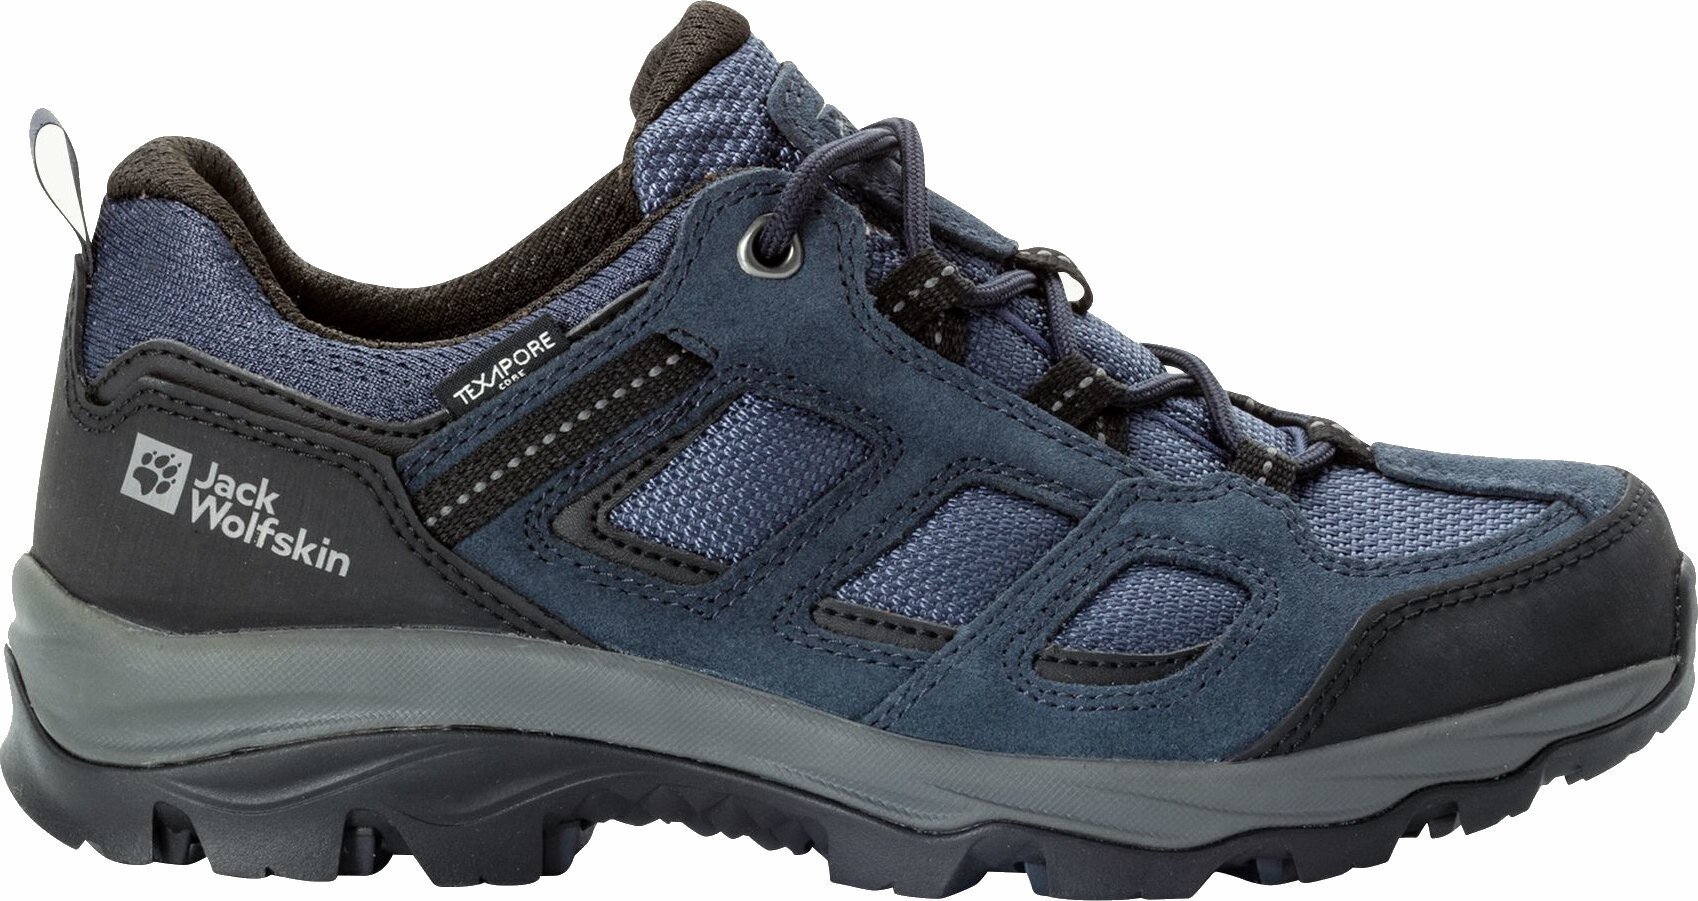 Womens Outdoor Shoes Jack Wolfskin Vojo 3 Texapore Low W Graphite 38 Womens Outdoor Shoes